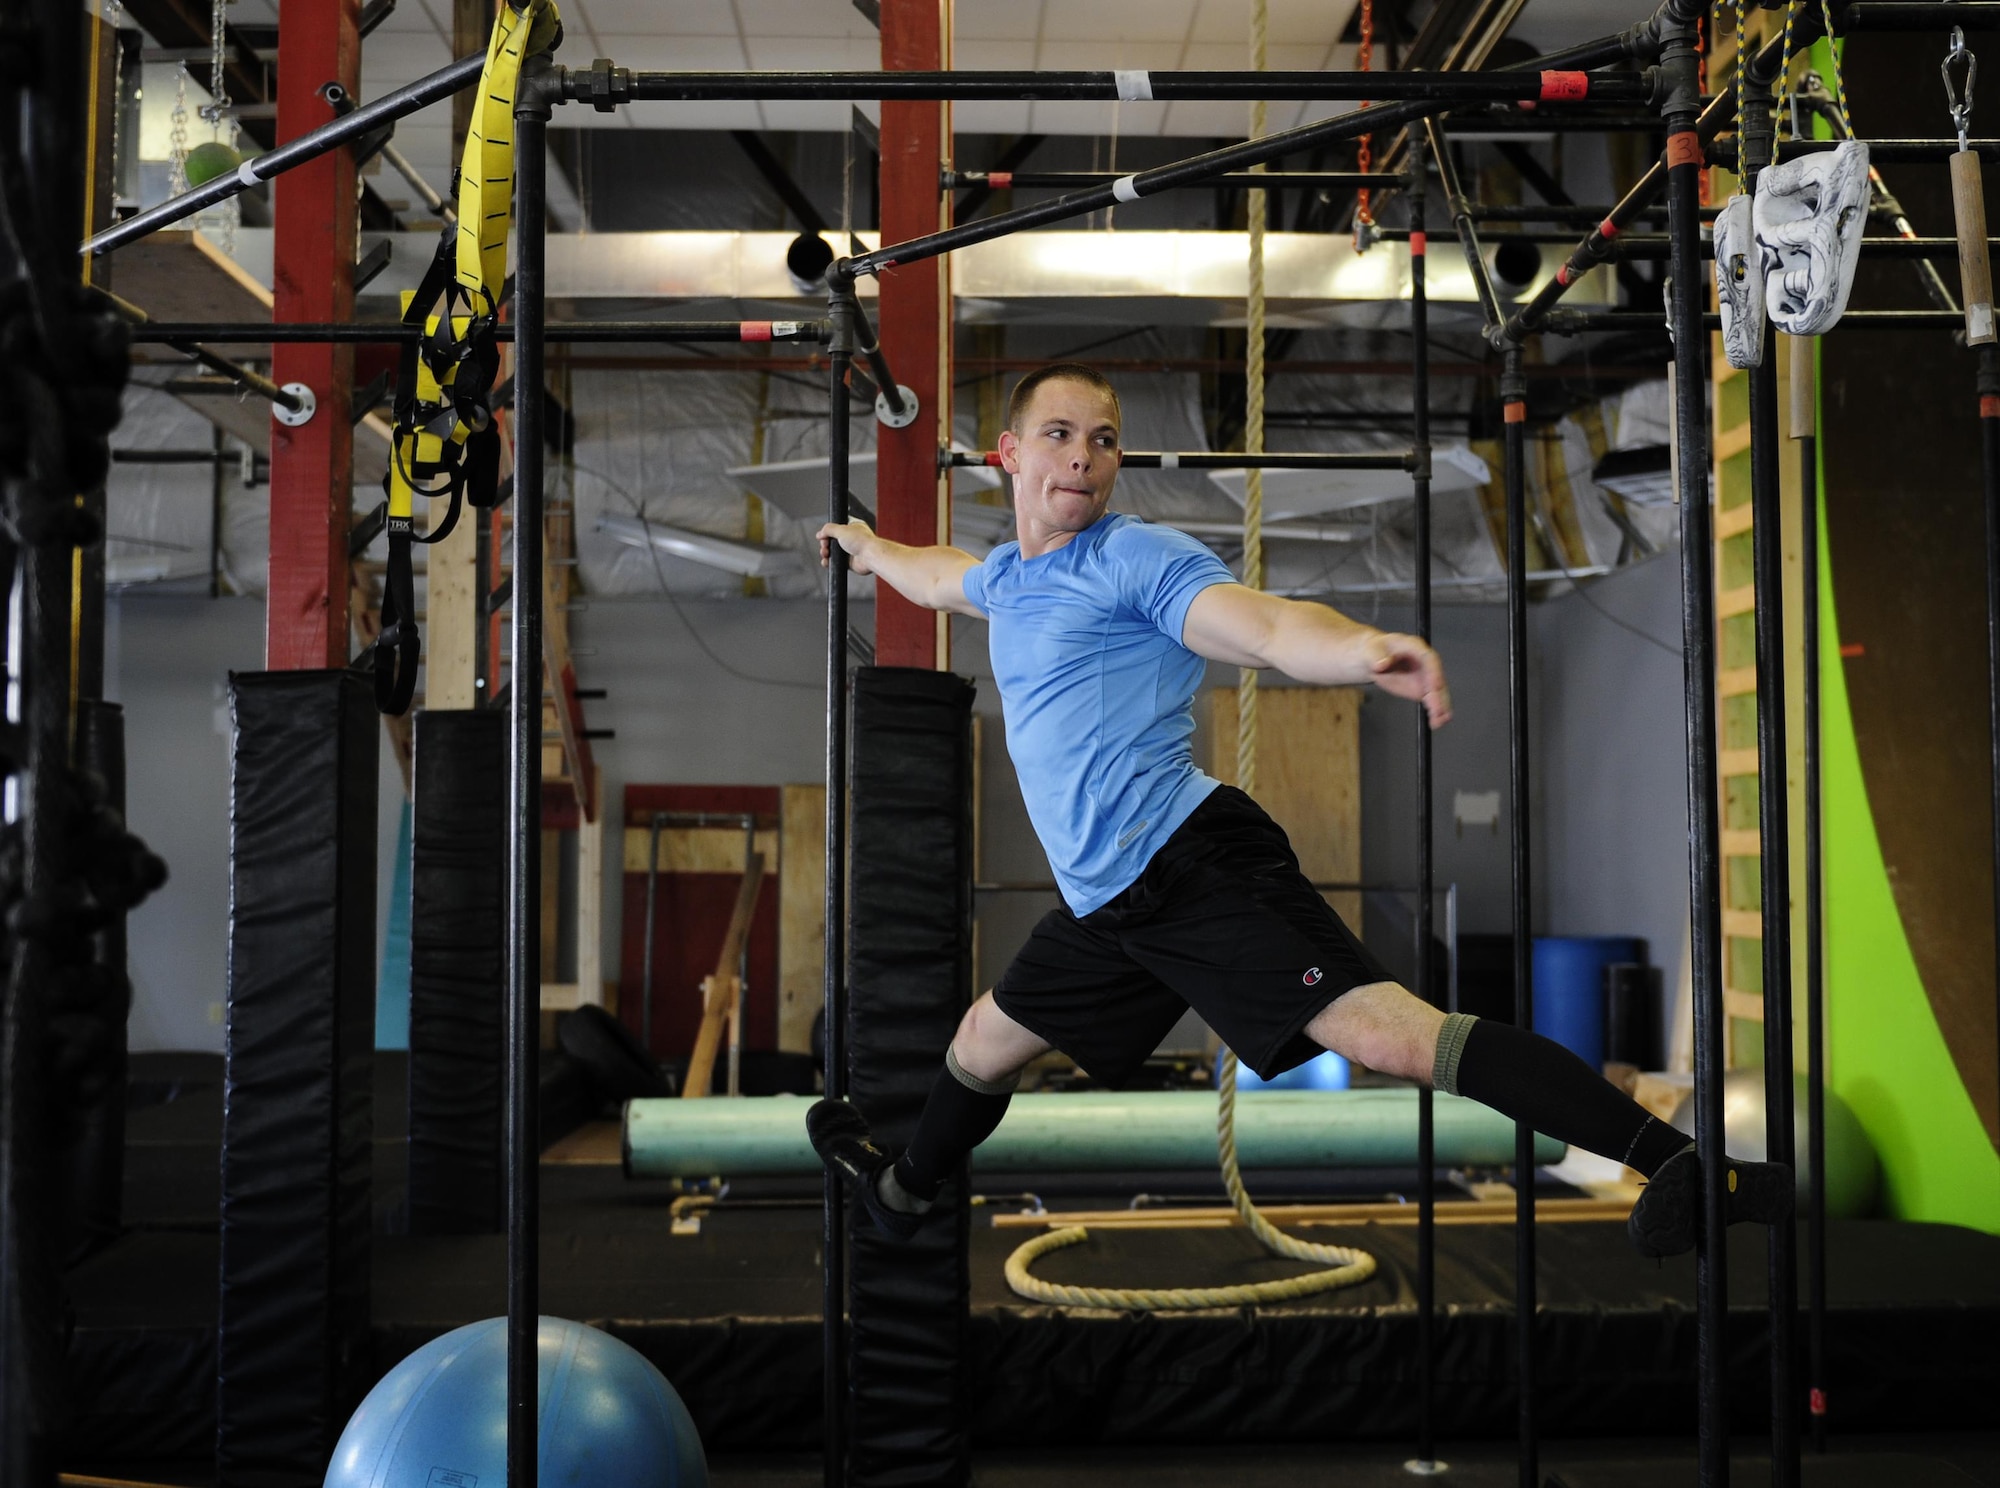 Staff Sgt. Randall Forsythe trains May 21, 2015, to compete on the TV show American Ninja Warrior. Forsythe, a 375th Civil Engineer Squadron firefighter, found out he was selected to represent the Air Force on a special military tribute episode. (U.S. Air Force photo/Staff Sgt. Stephenie Wade)